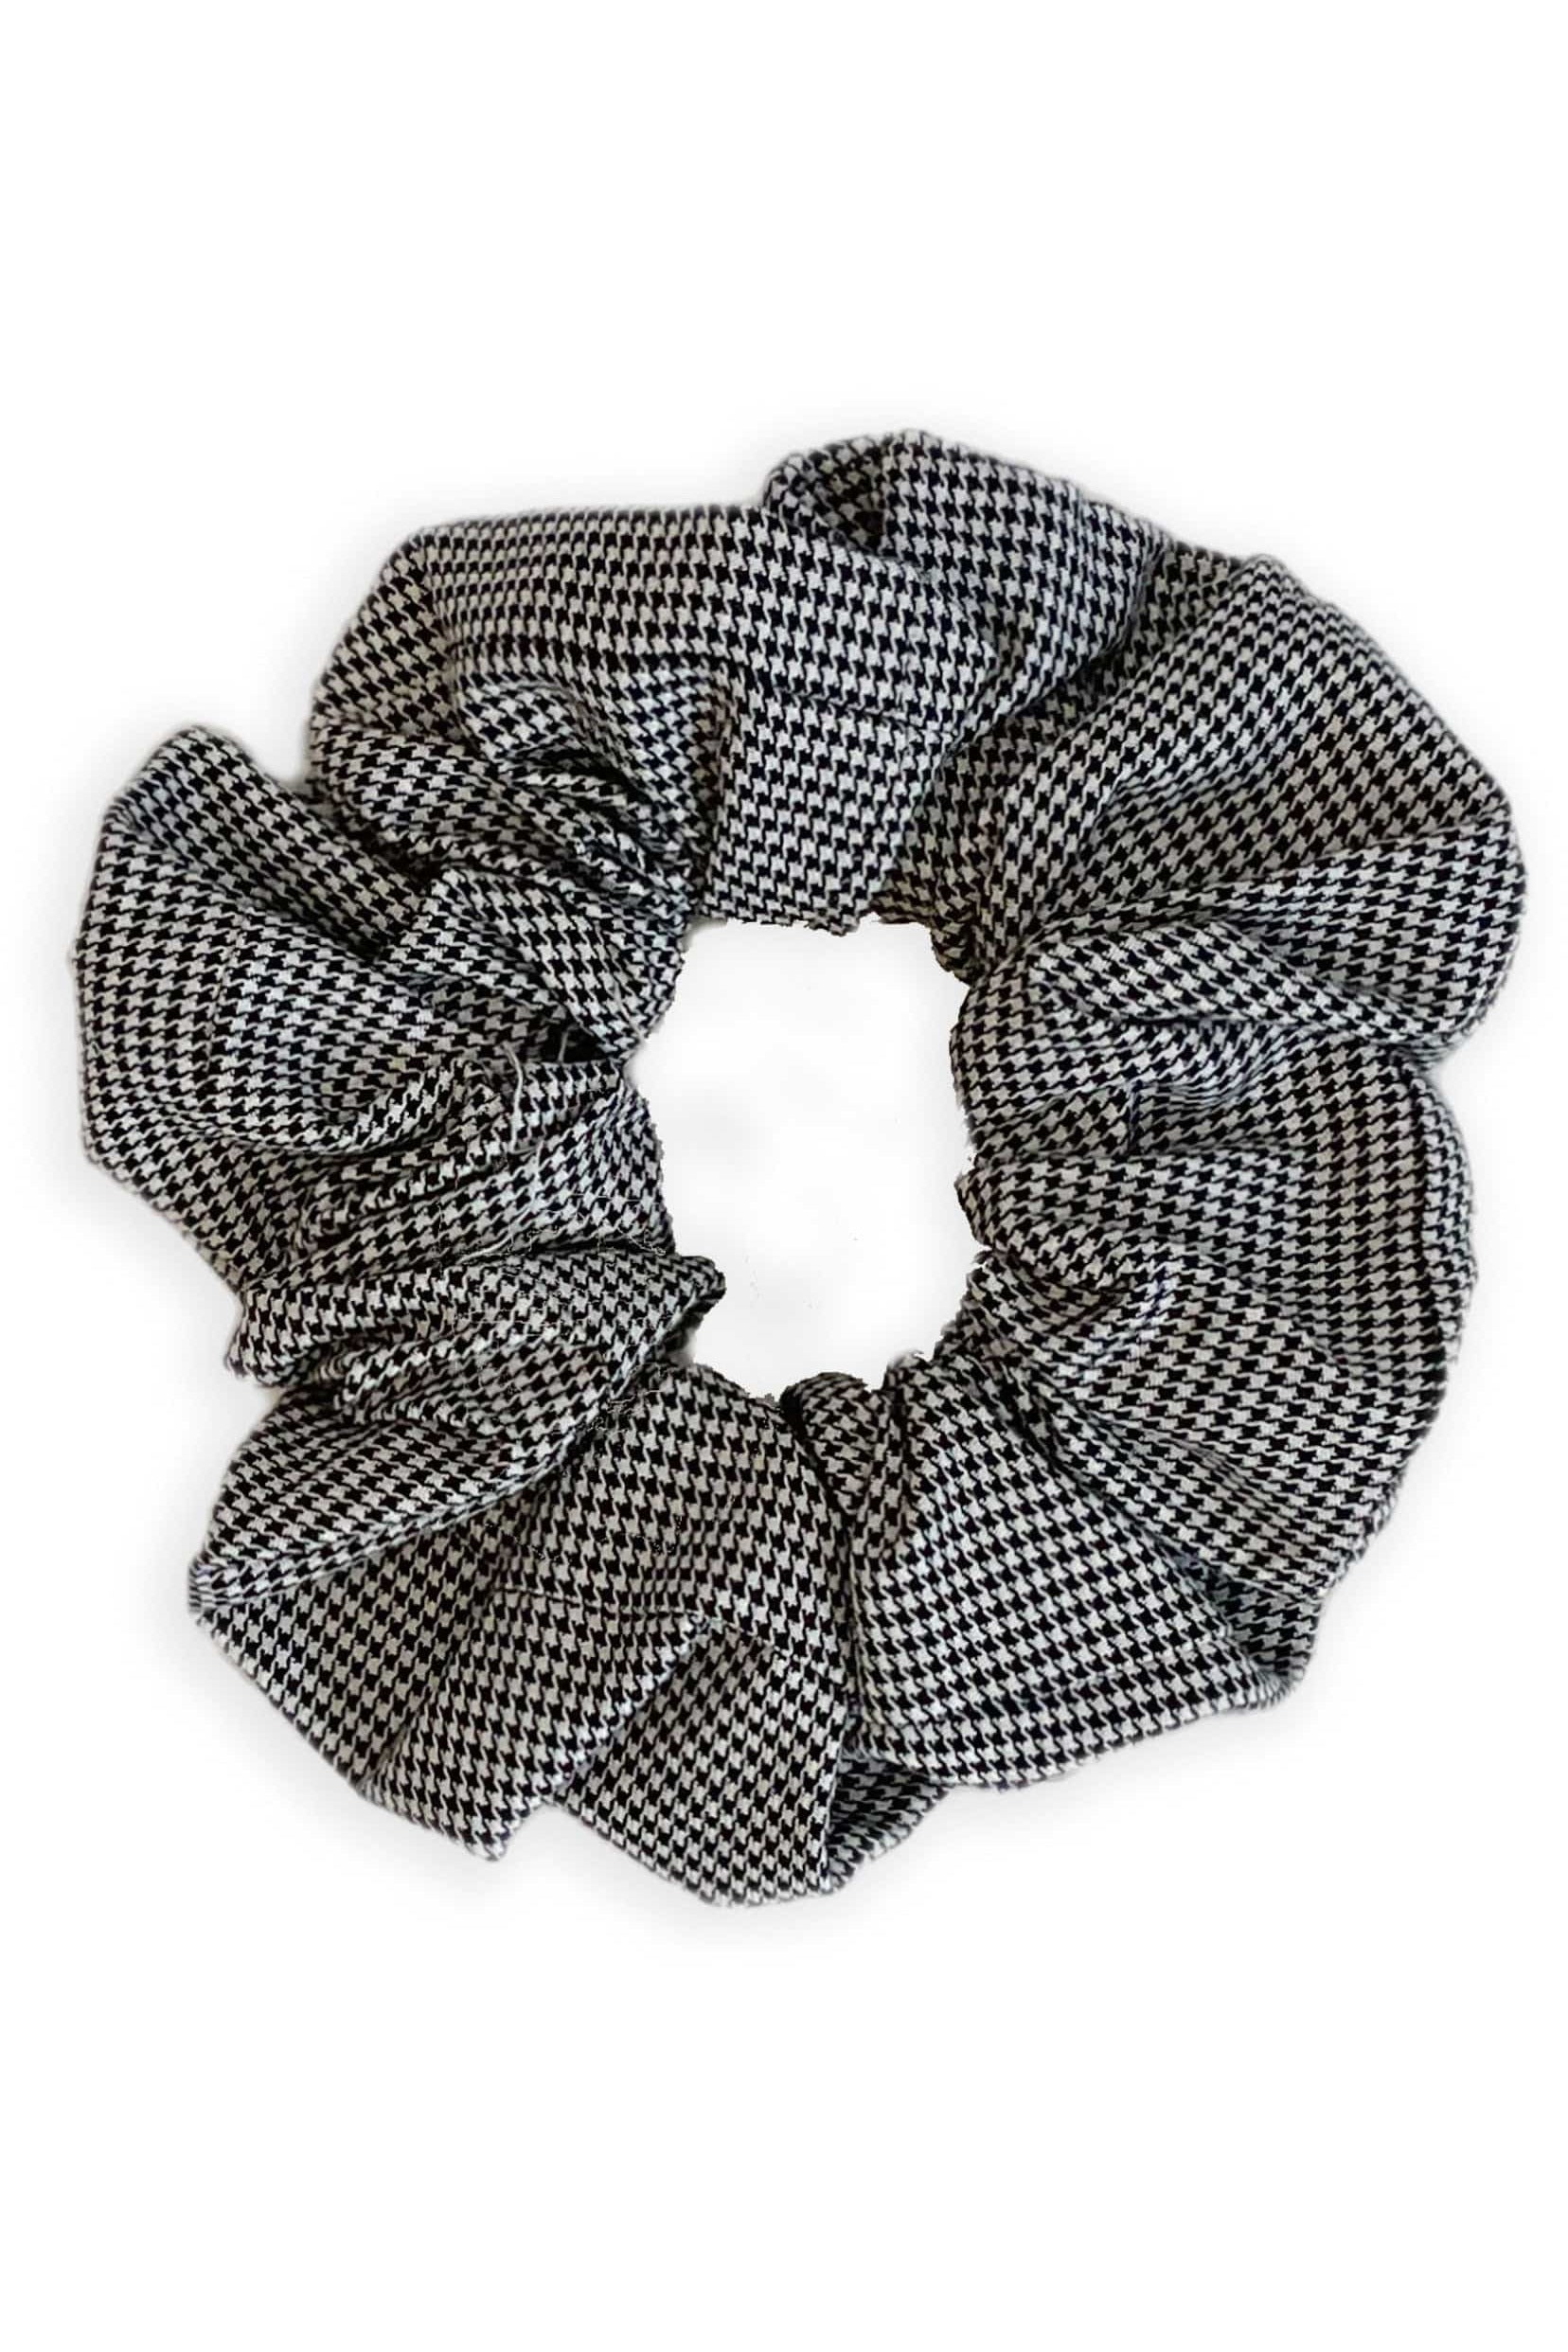 Scrunchies for Nature vs Nurture Hair Accessories CHRISTINE ALCALAY Tiny Houndstooth (Cotton)  